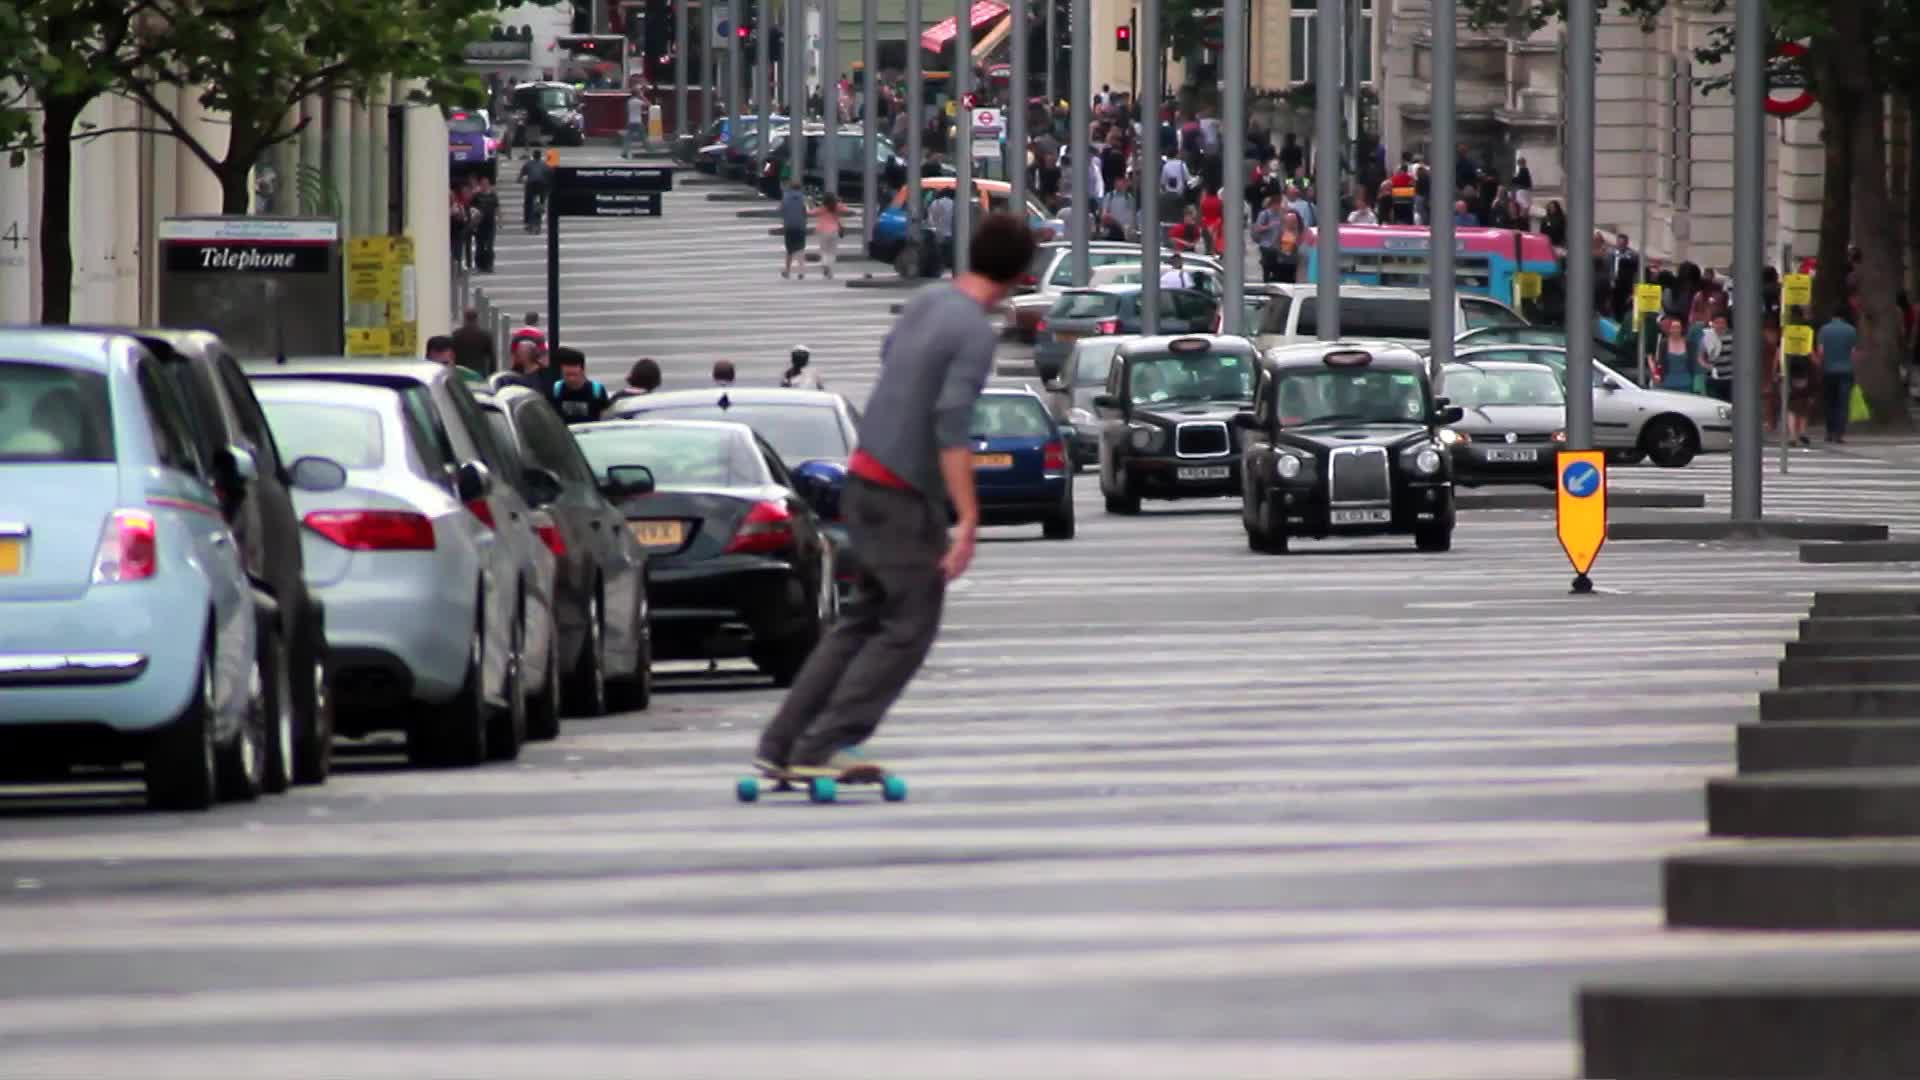 Skateboarding in the Road - Commercials - Y8.com